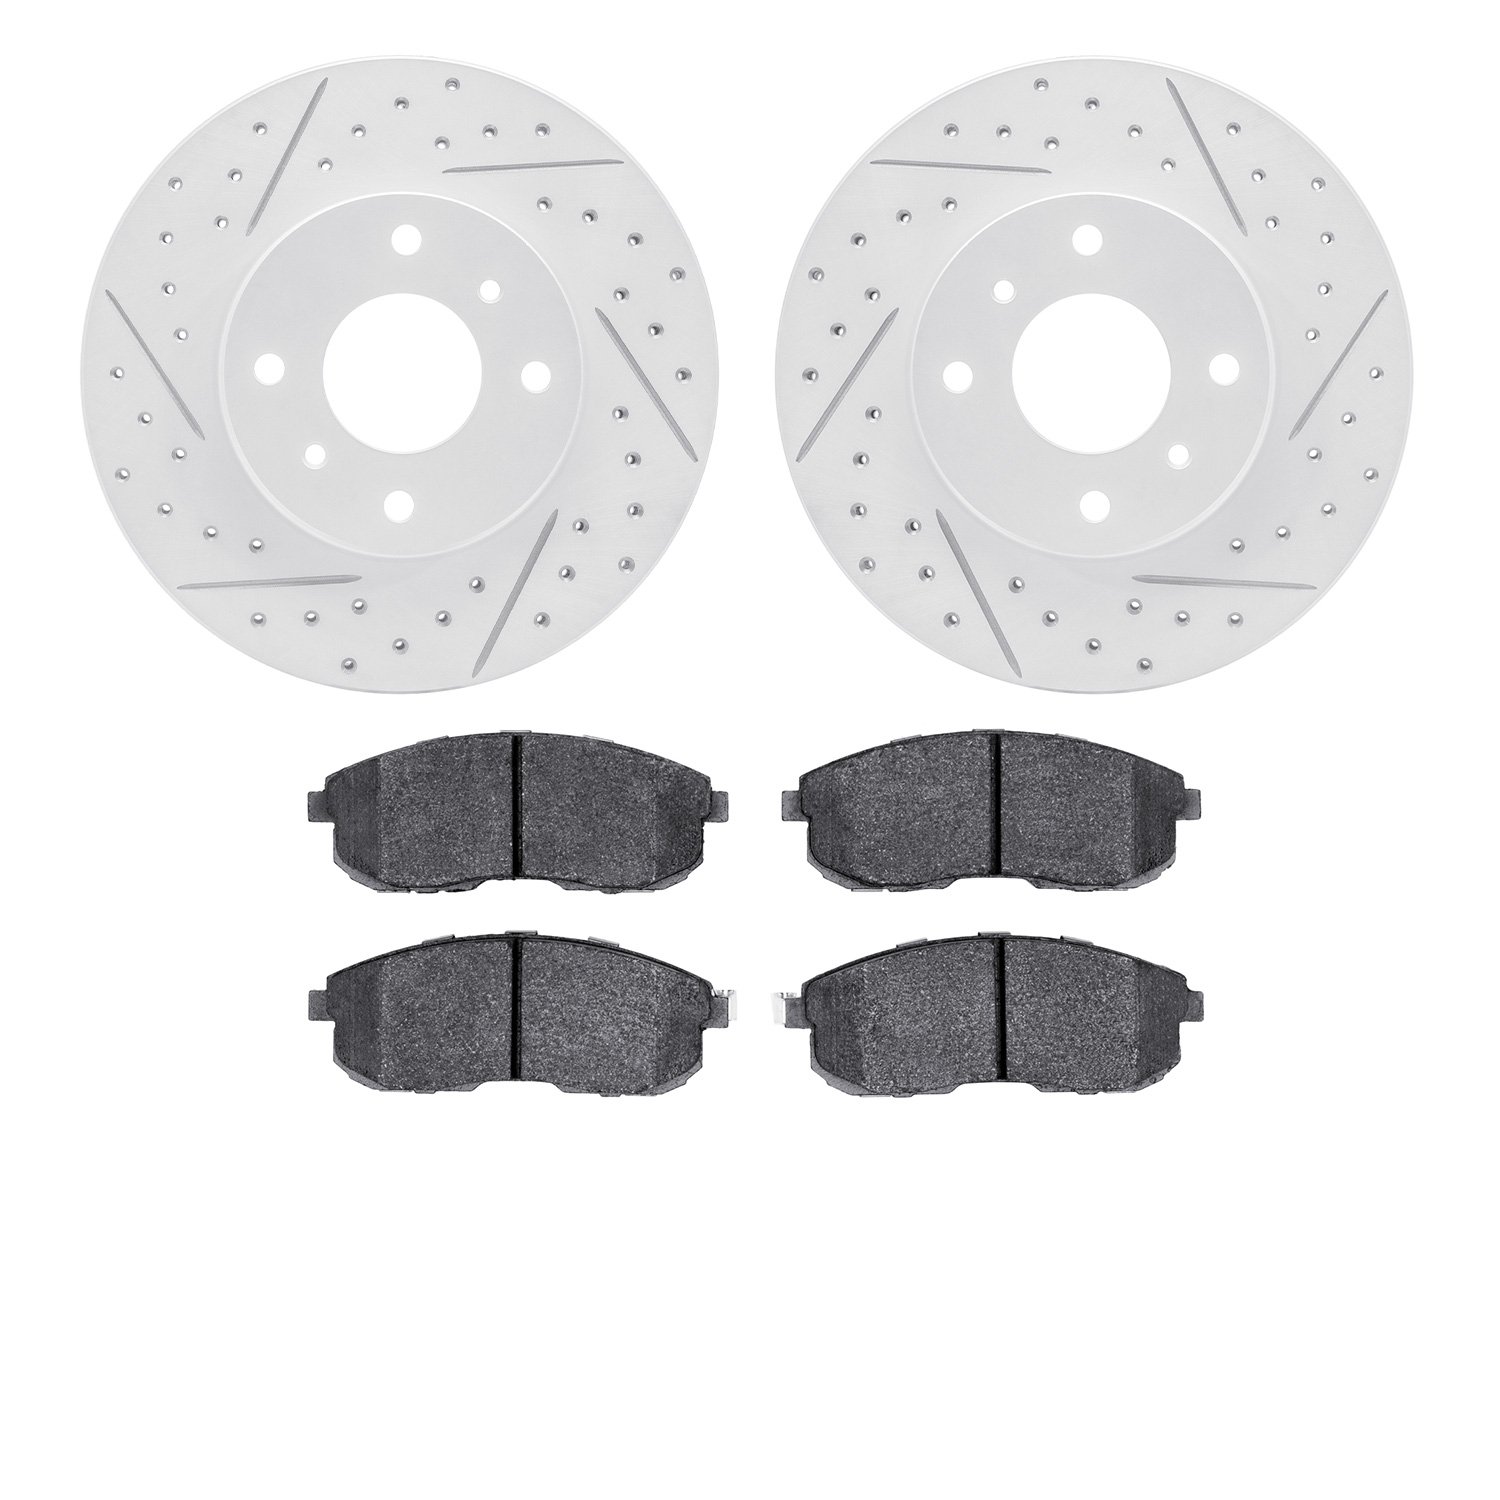 2502-67010 Geoperformance Drilled/Slotted Rotors w/5000 Advanced Brake Pads Kit, 1993-2006 Infiniti/Nissan, Position: Front